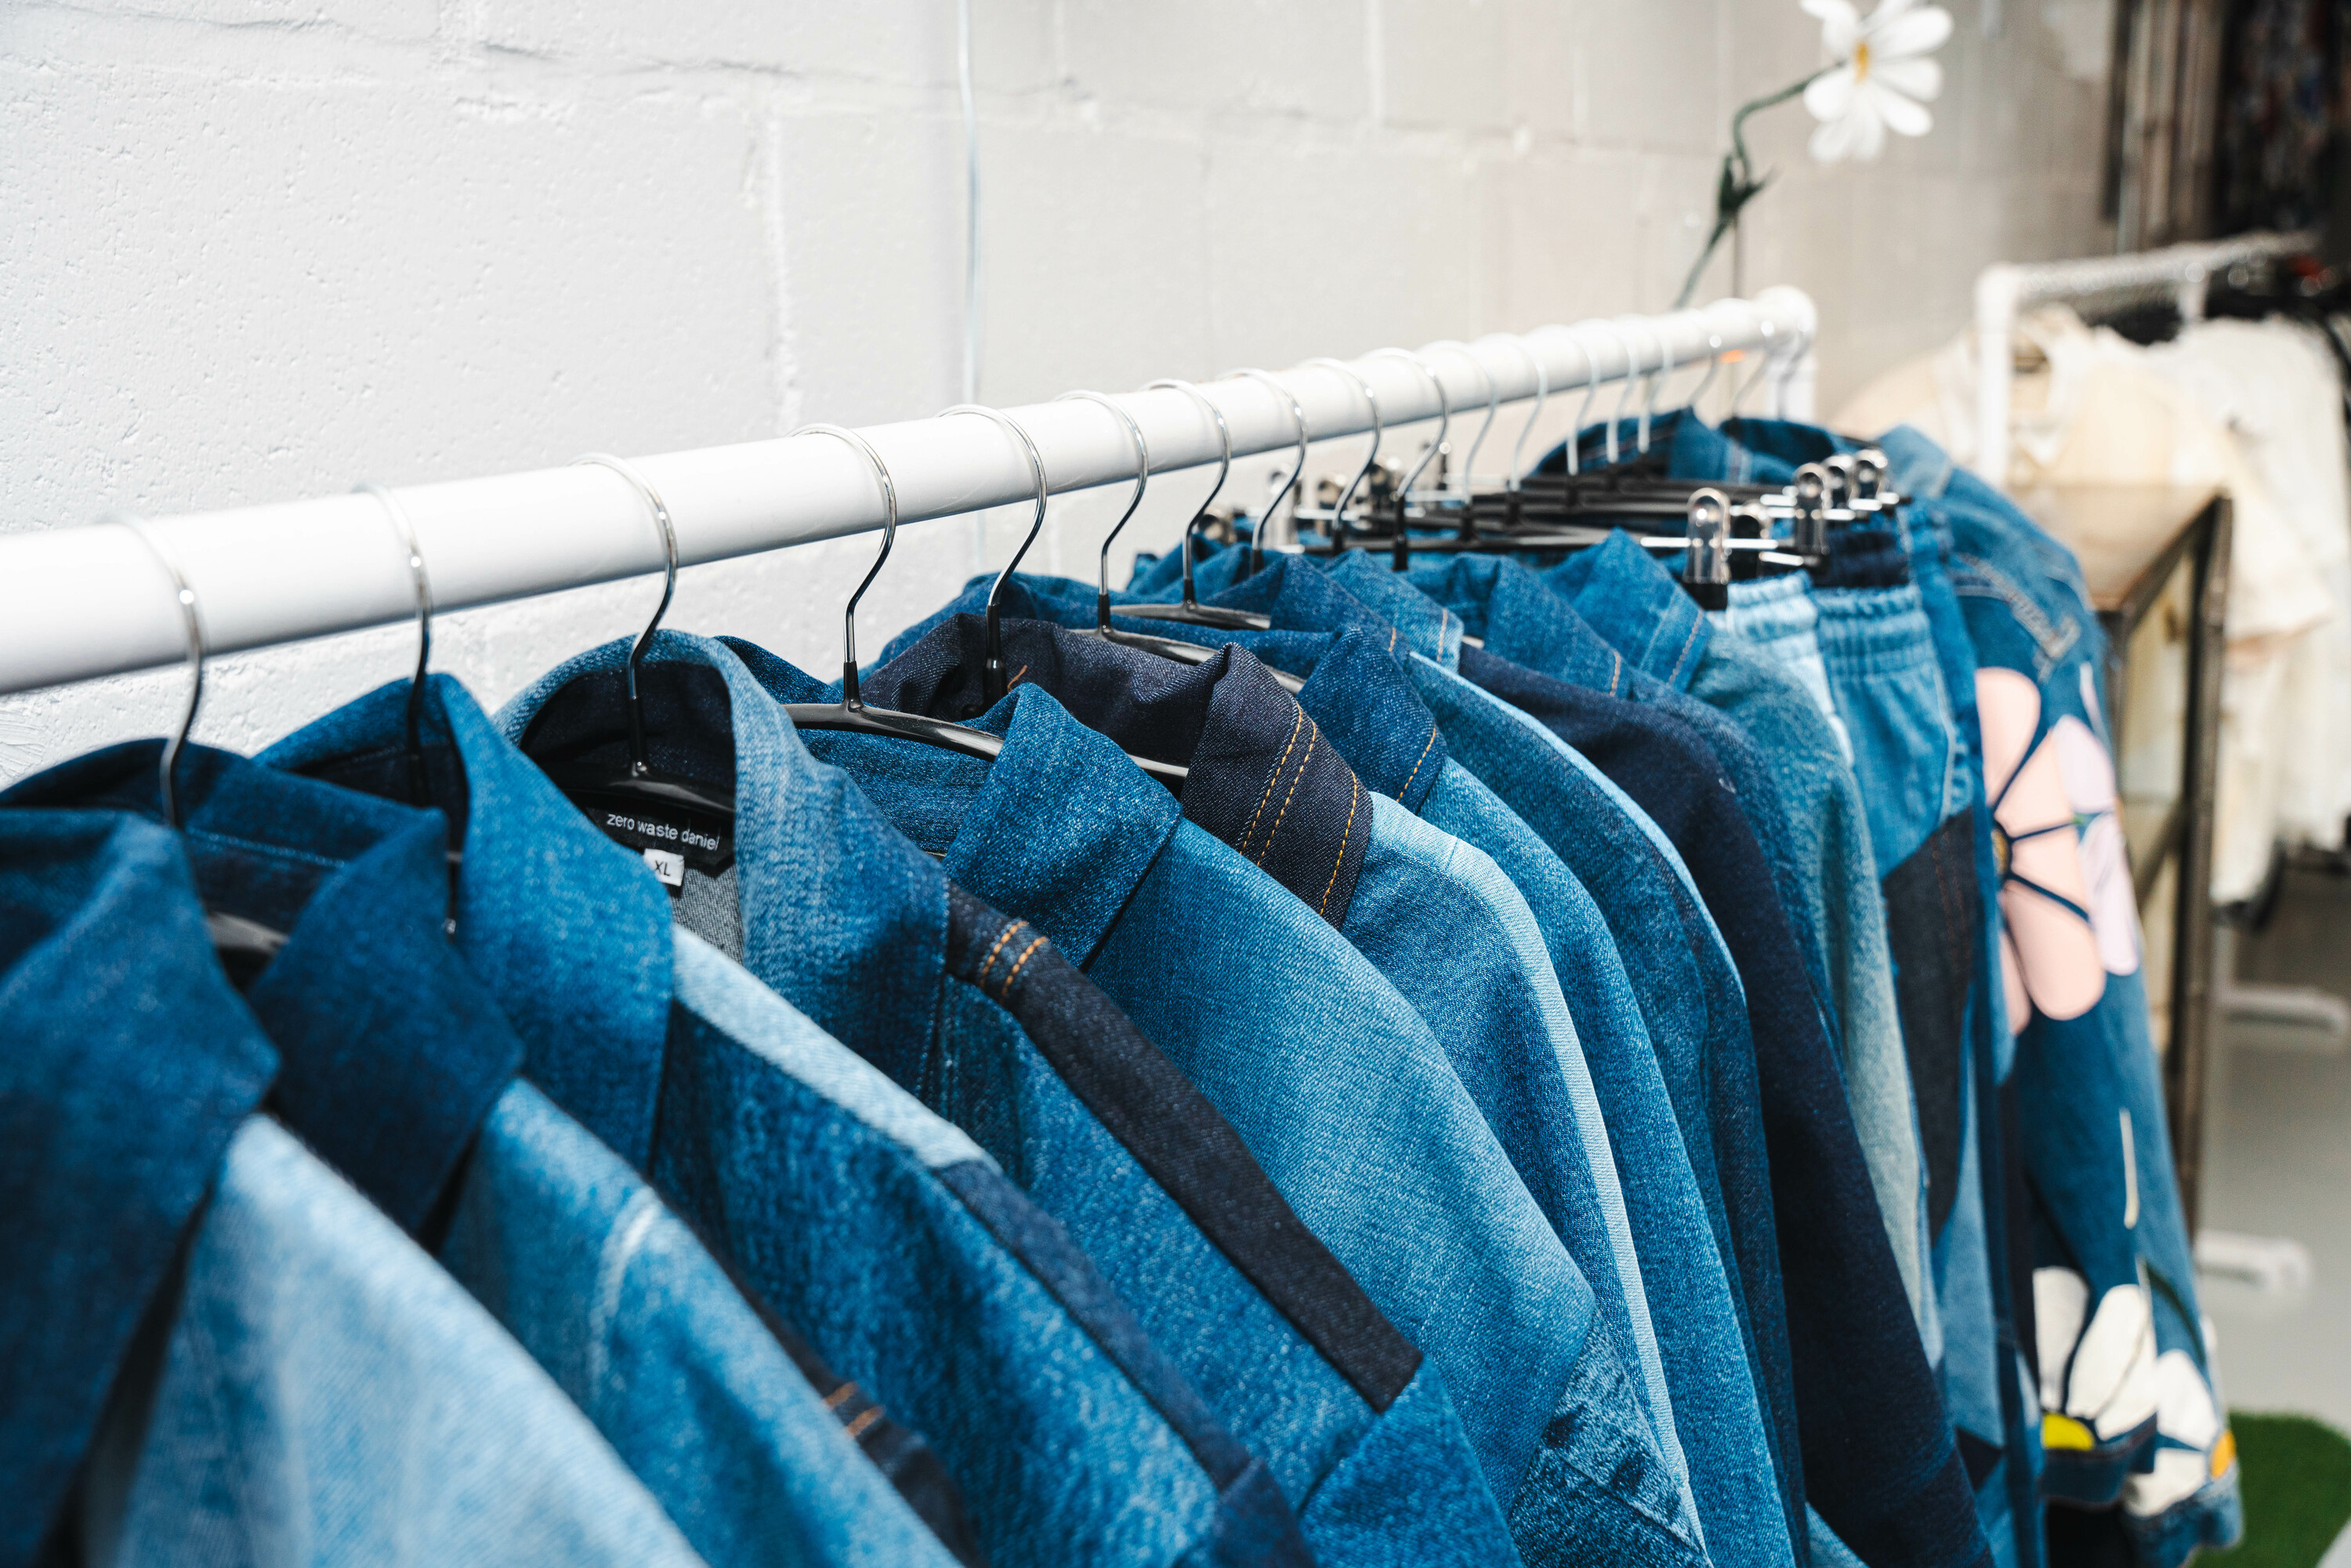 Zero Waste Daniel, an NYC-based fashion brand, just opened a store in  Brooklyn